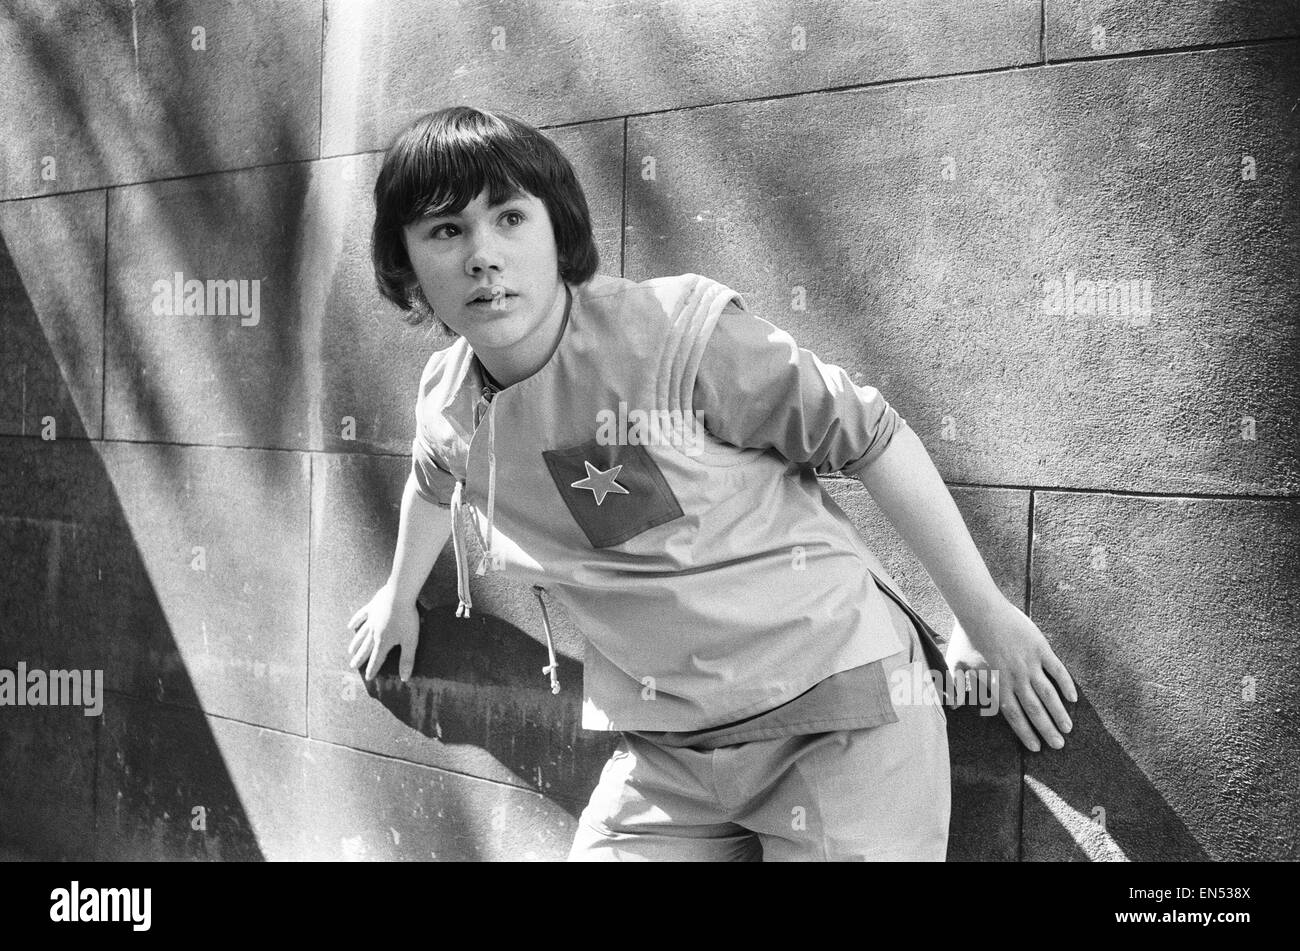 18 year old Matthew Waterhouse making his debut in the BBC TV series Dr Who. Waterhouse will play the part of Adric and joins Lalla Ward in the Tardis in the story entitled 'Full Circle' 15th May 1980 Stock Photo